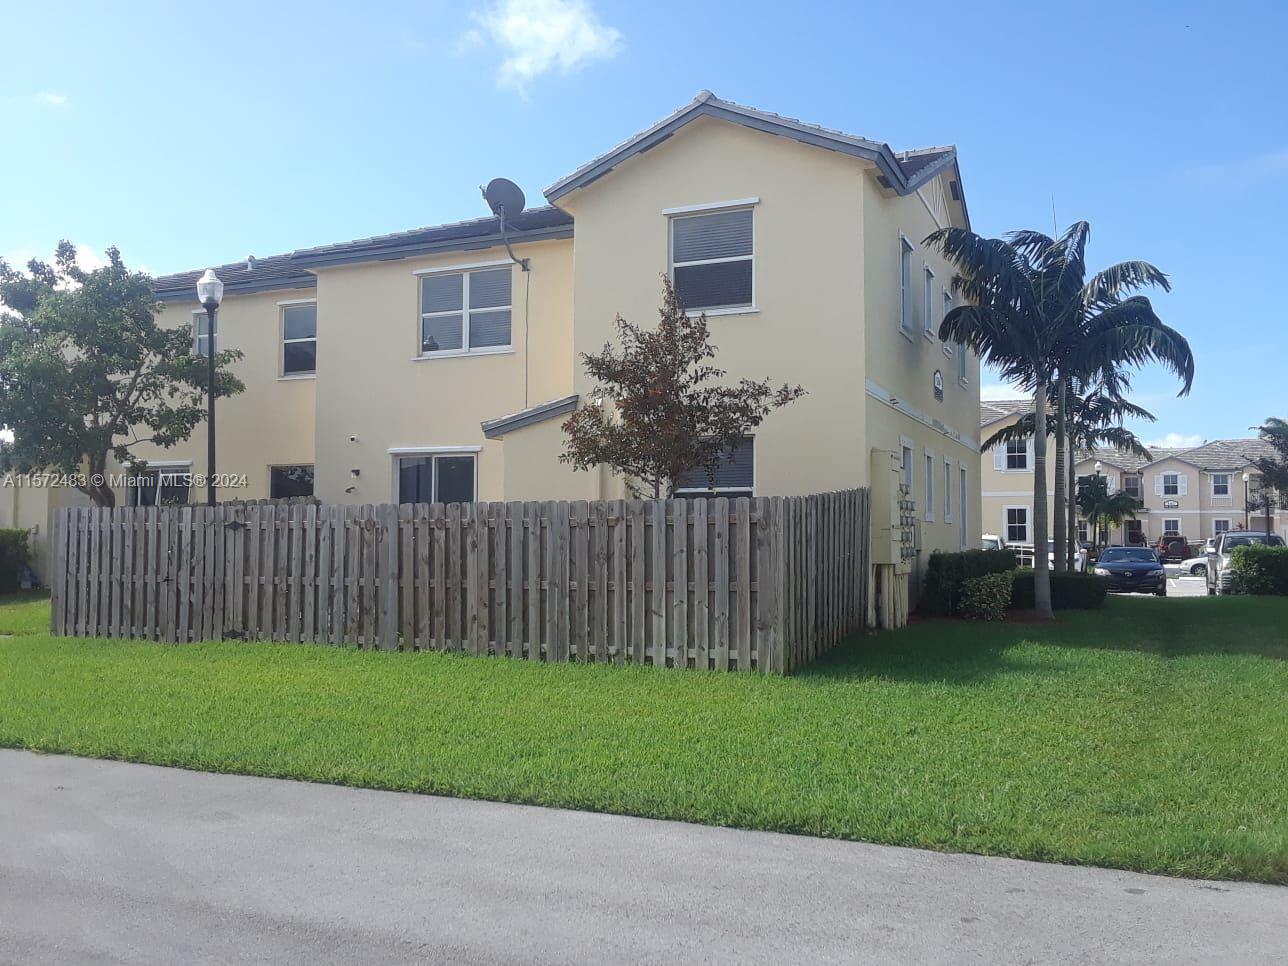 Beautiful 3 bedroom 2 bathroom 2nd floor condo. Tiled floors. Granite countertop kitchen. Washer and dryer in unit. Family oriented community. Gated Community. Beautiful Clubhouse with many amenities. Currently leased.